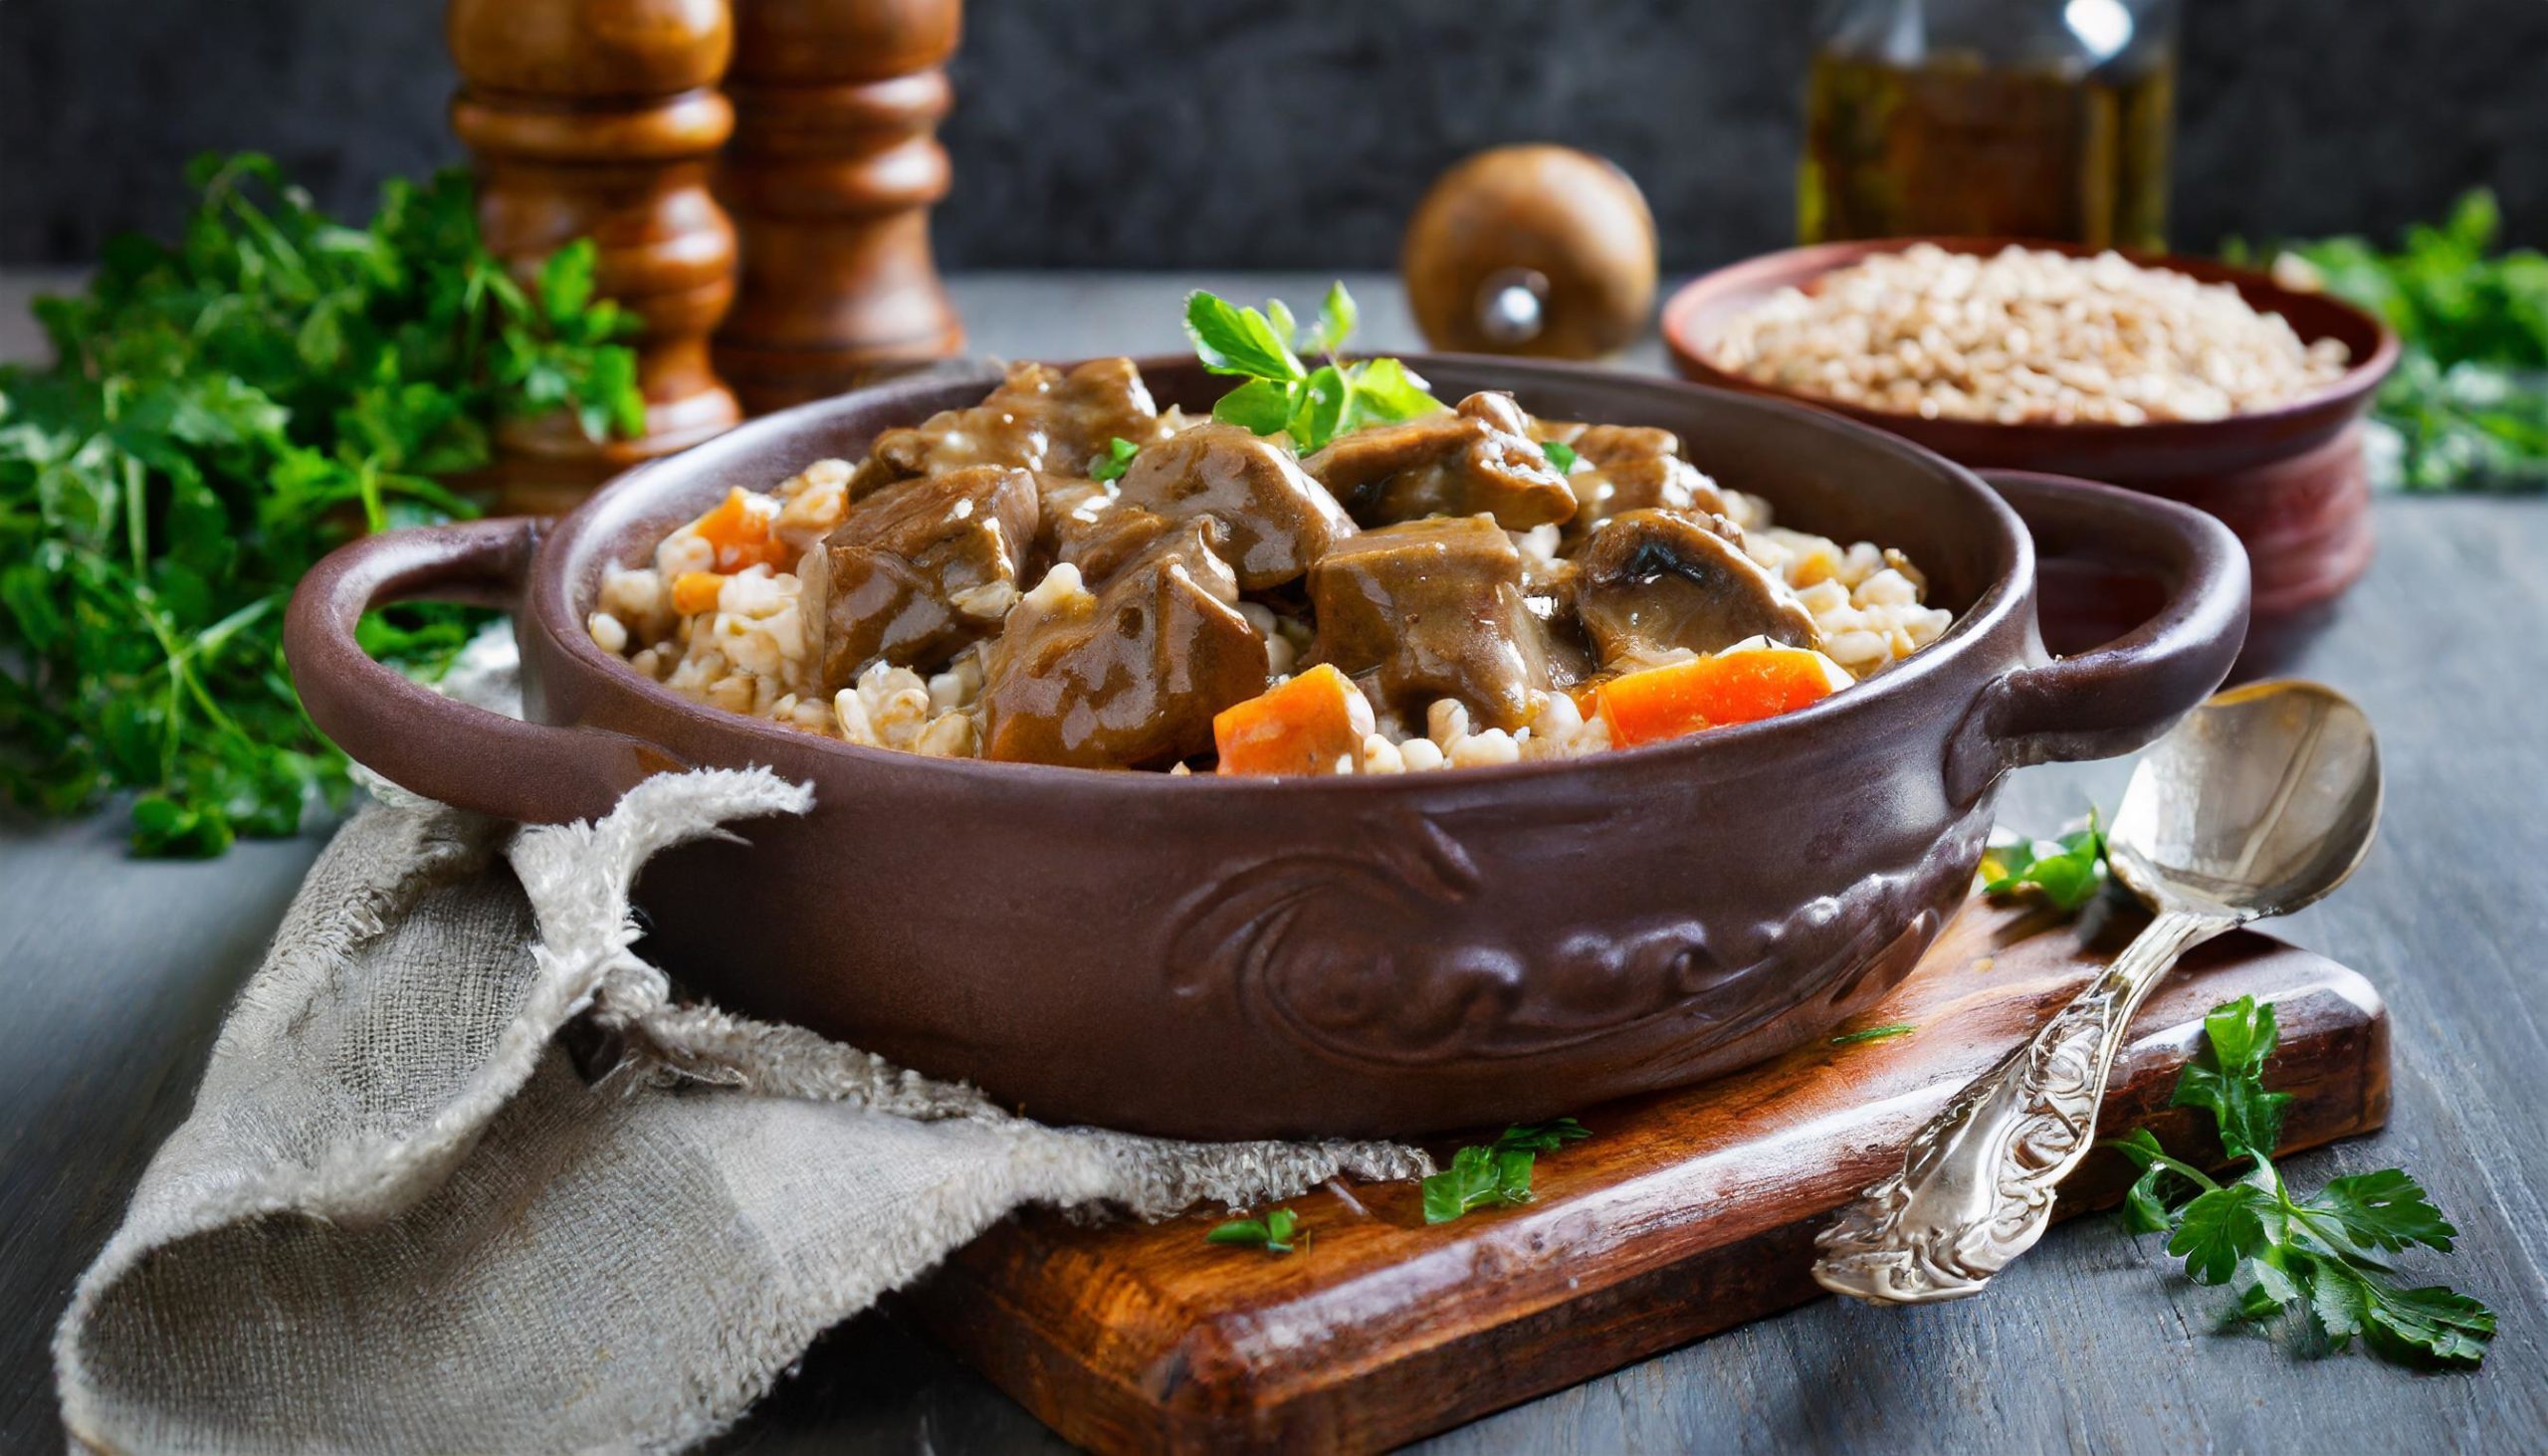 Beef and barley stew with mushrooms